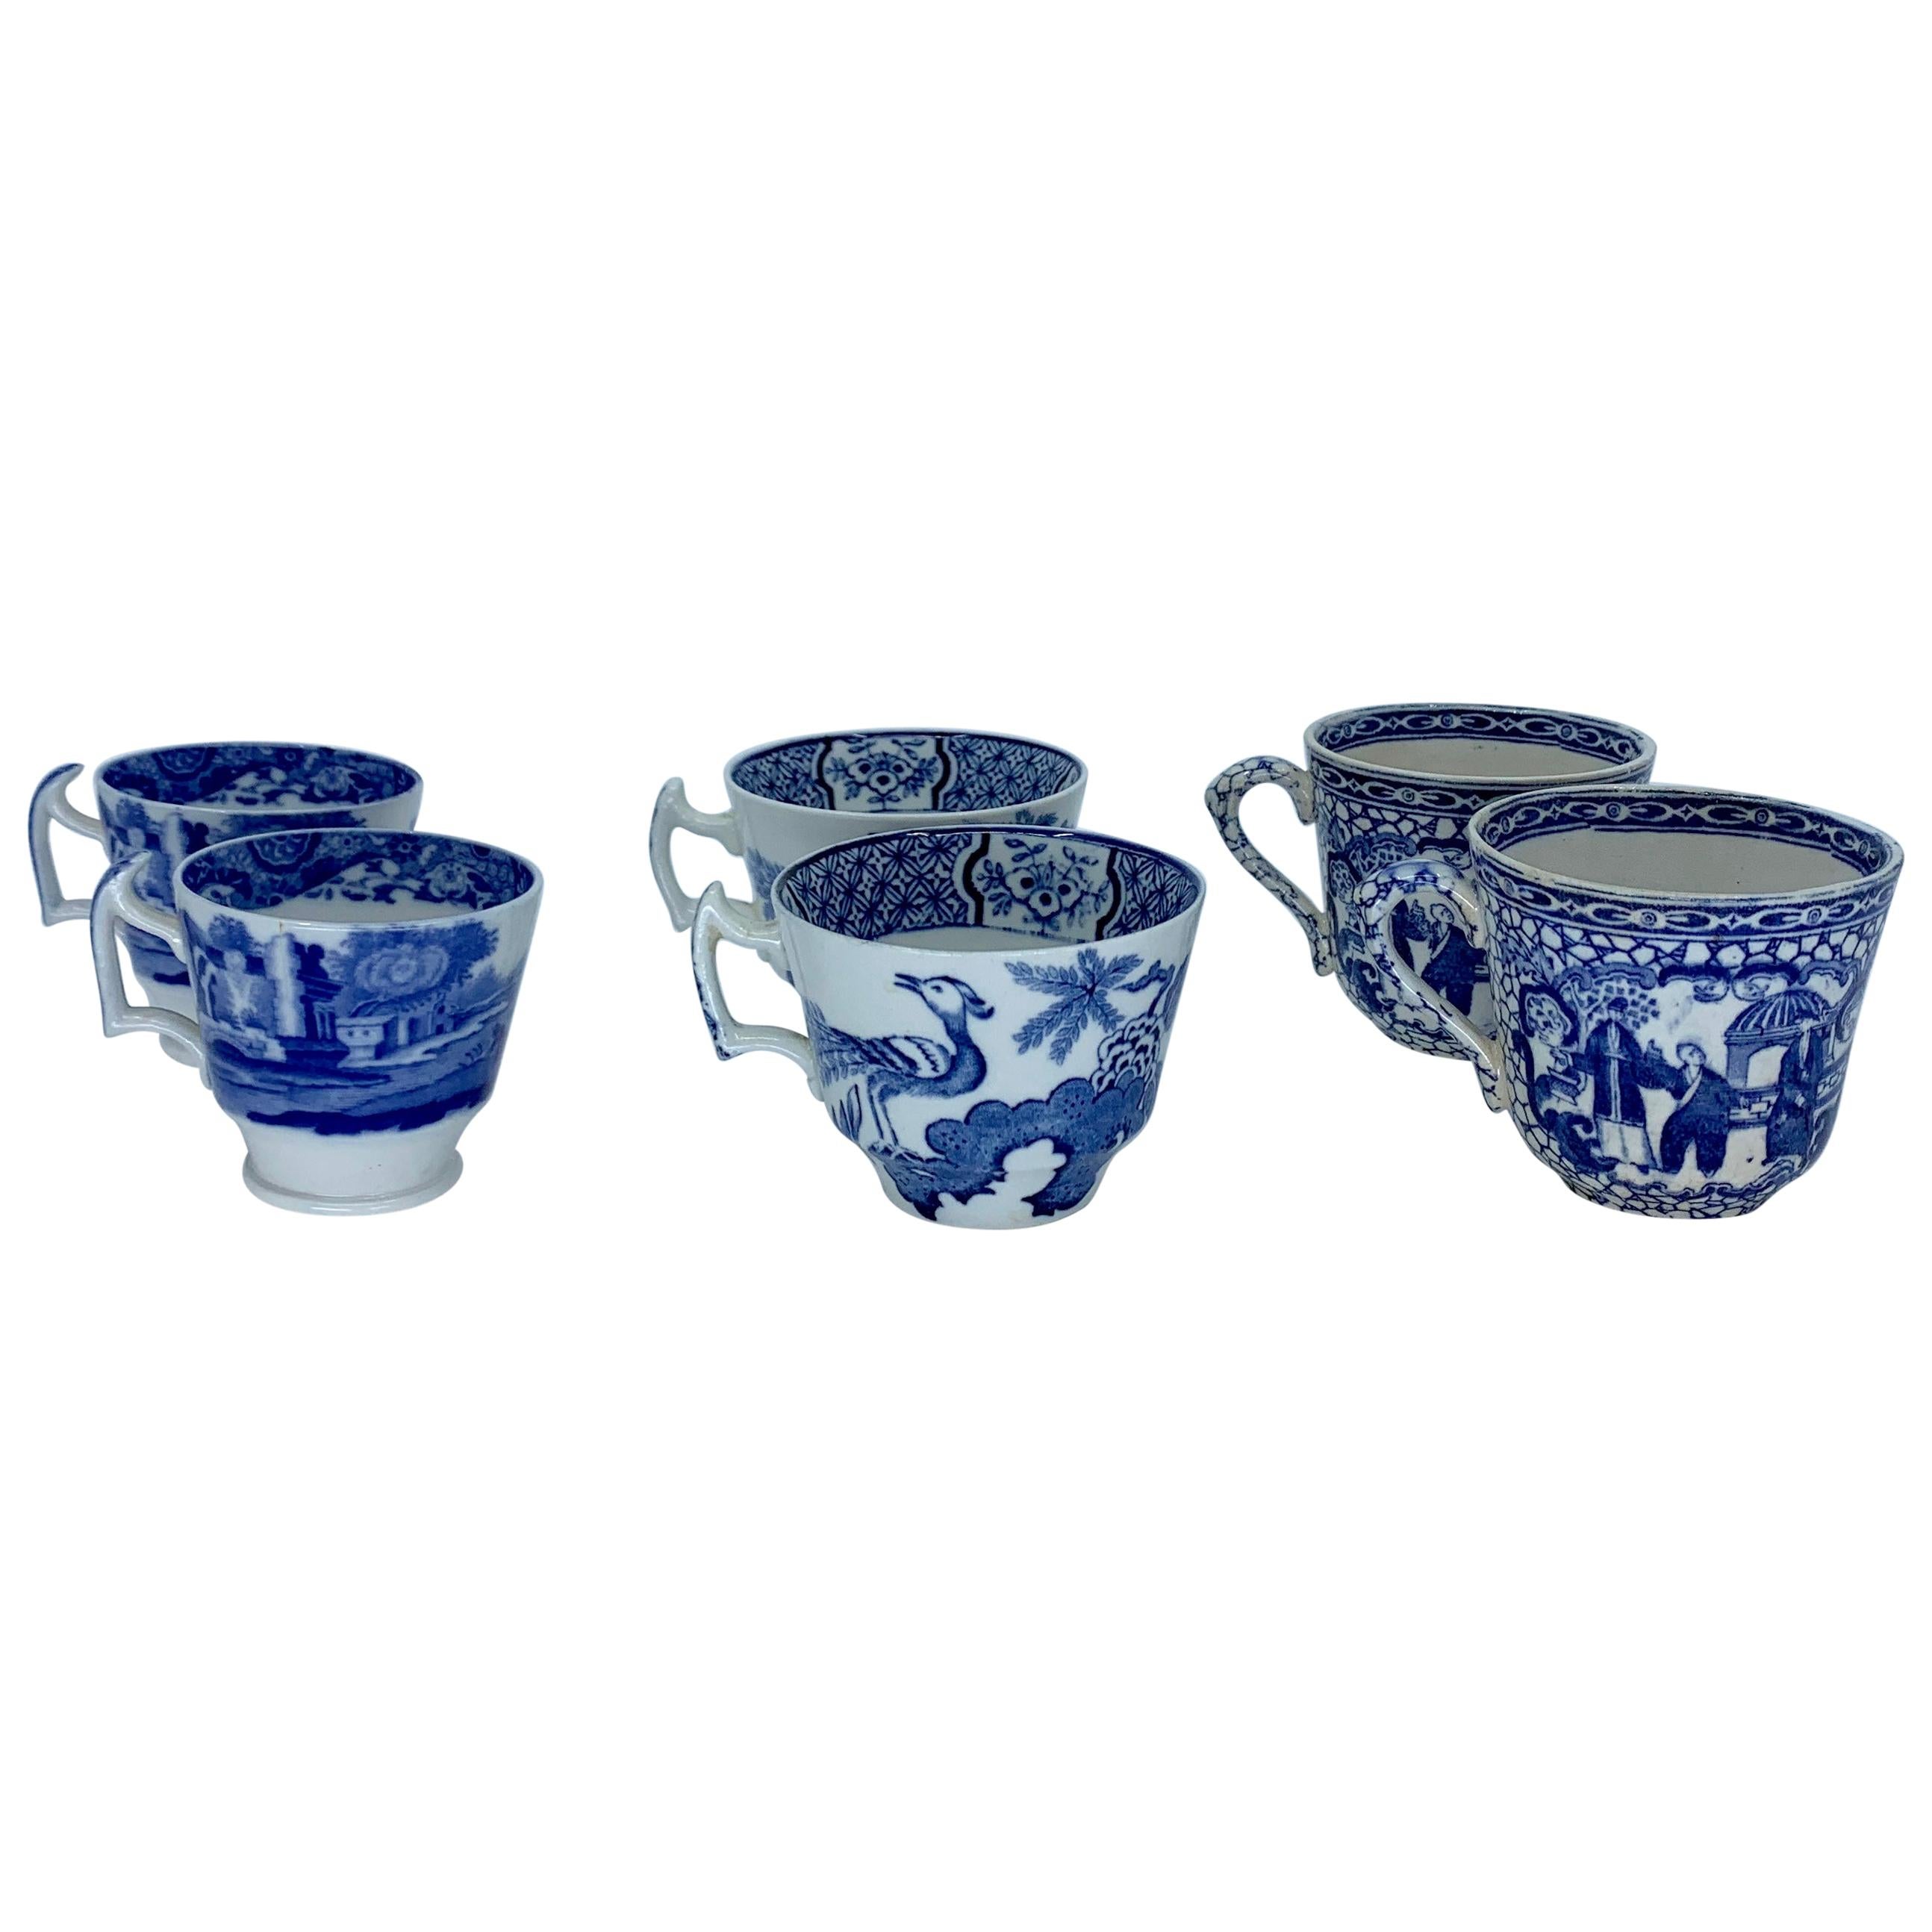 Six Blue and White Espresso Cups